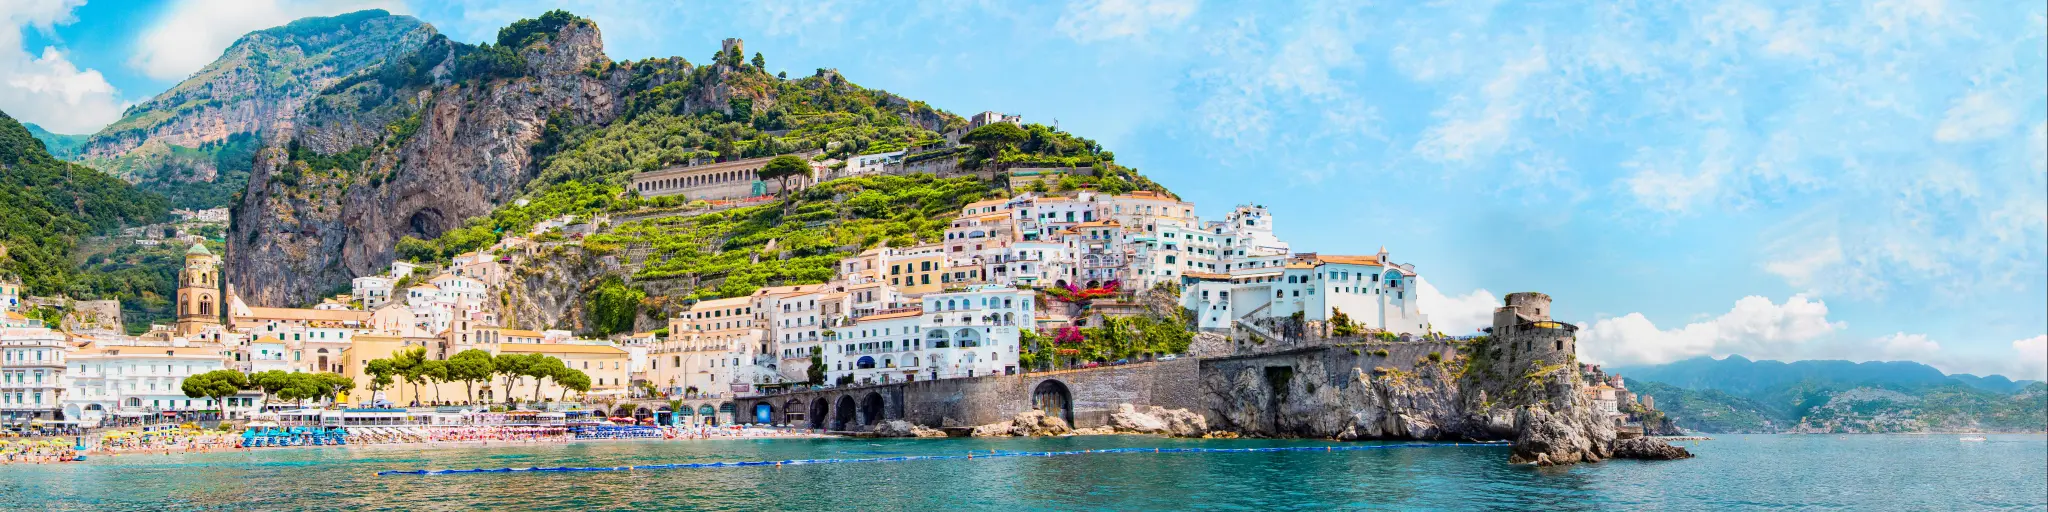 Panoramic view, aerial skyline of small haven of Amalfi village with tiny beach and colorful houses located on rock. 